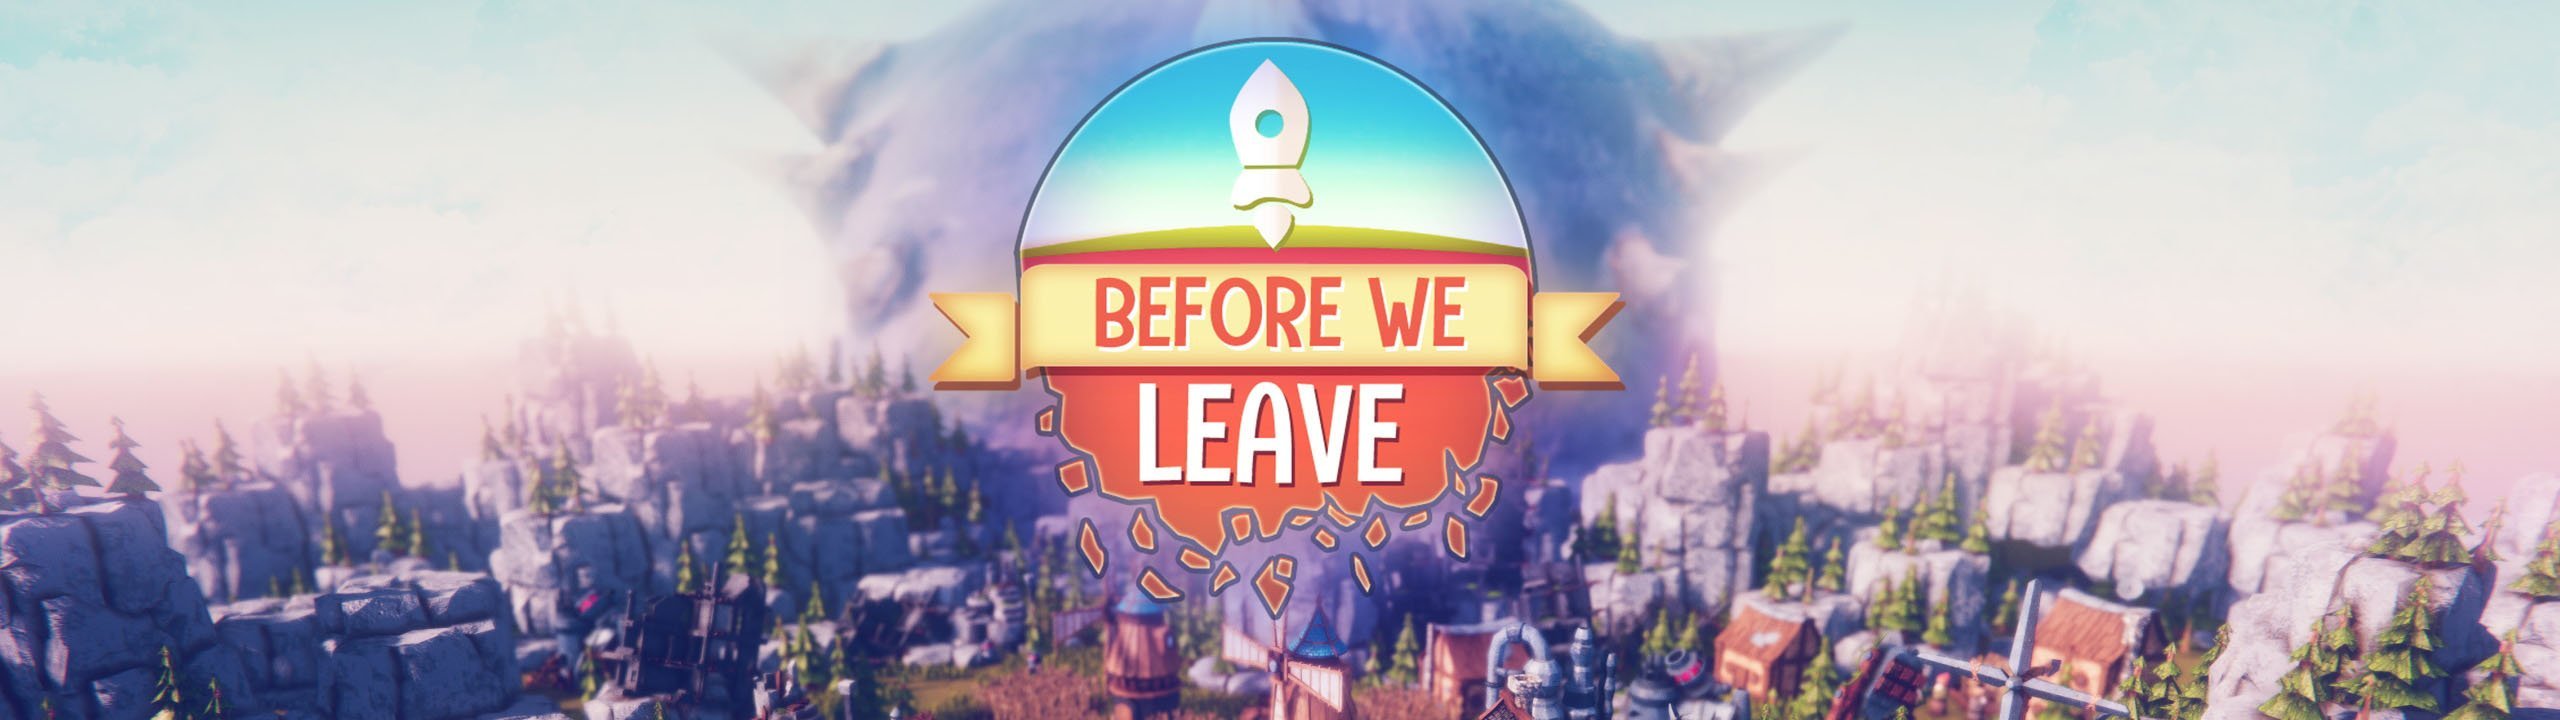 before-we-leave